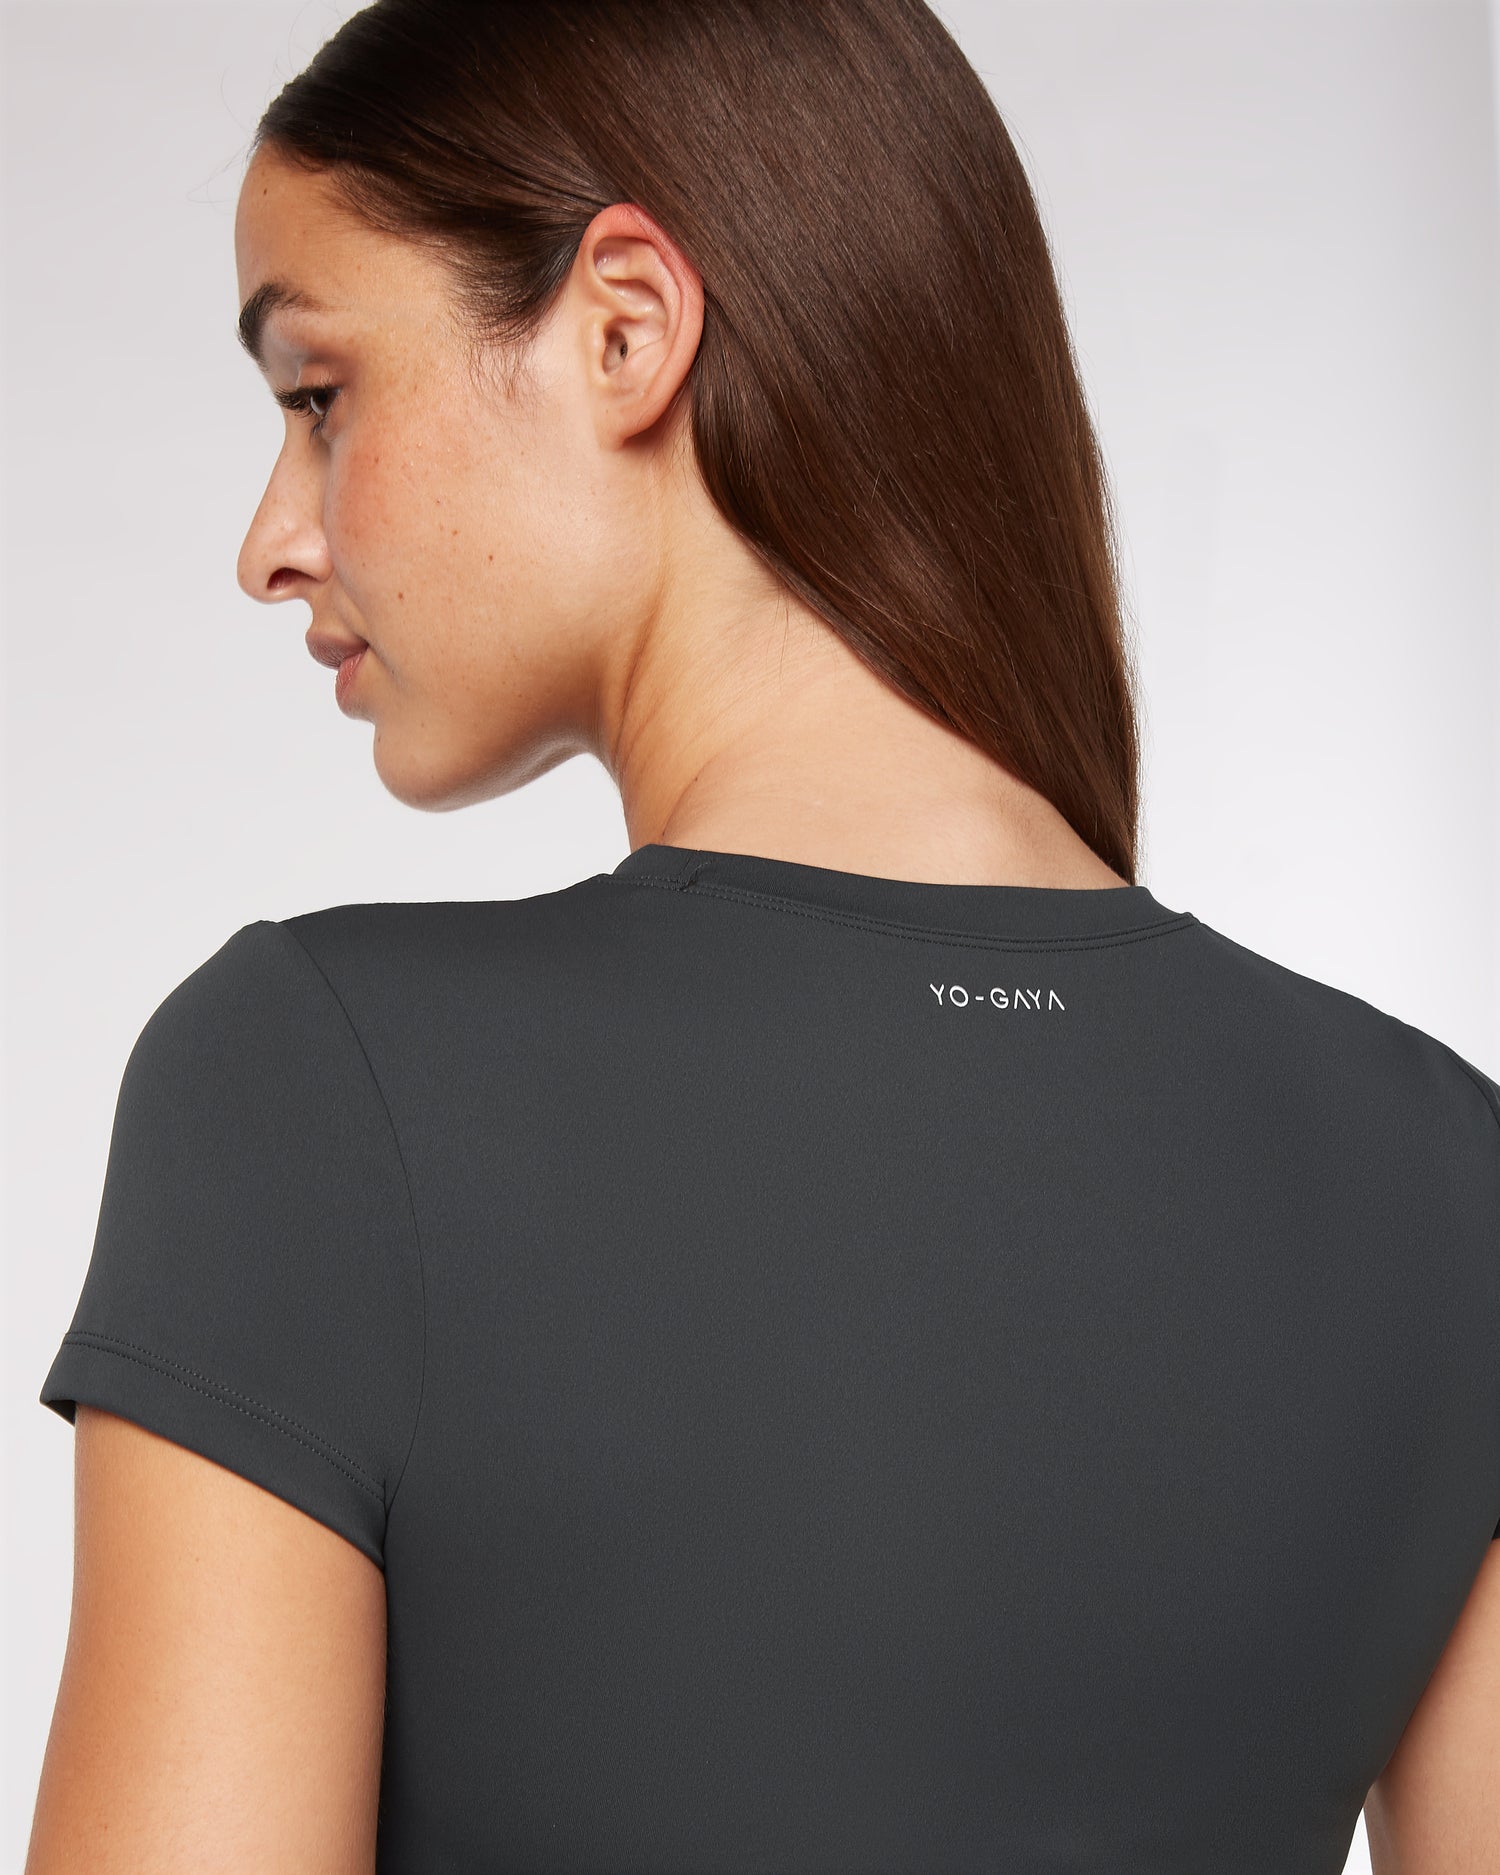 Short Sleeve Top - Anthracite